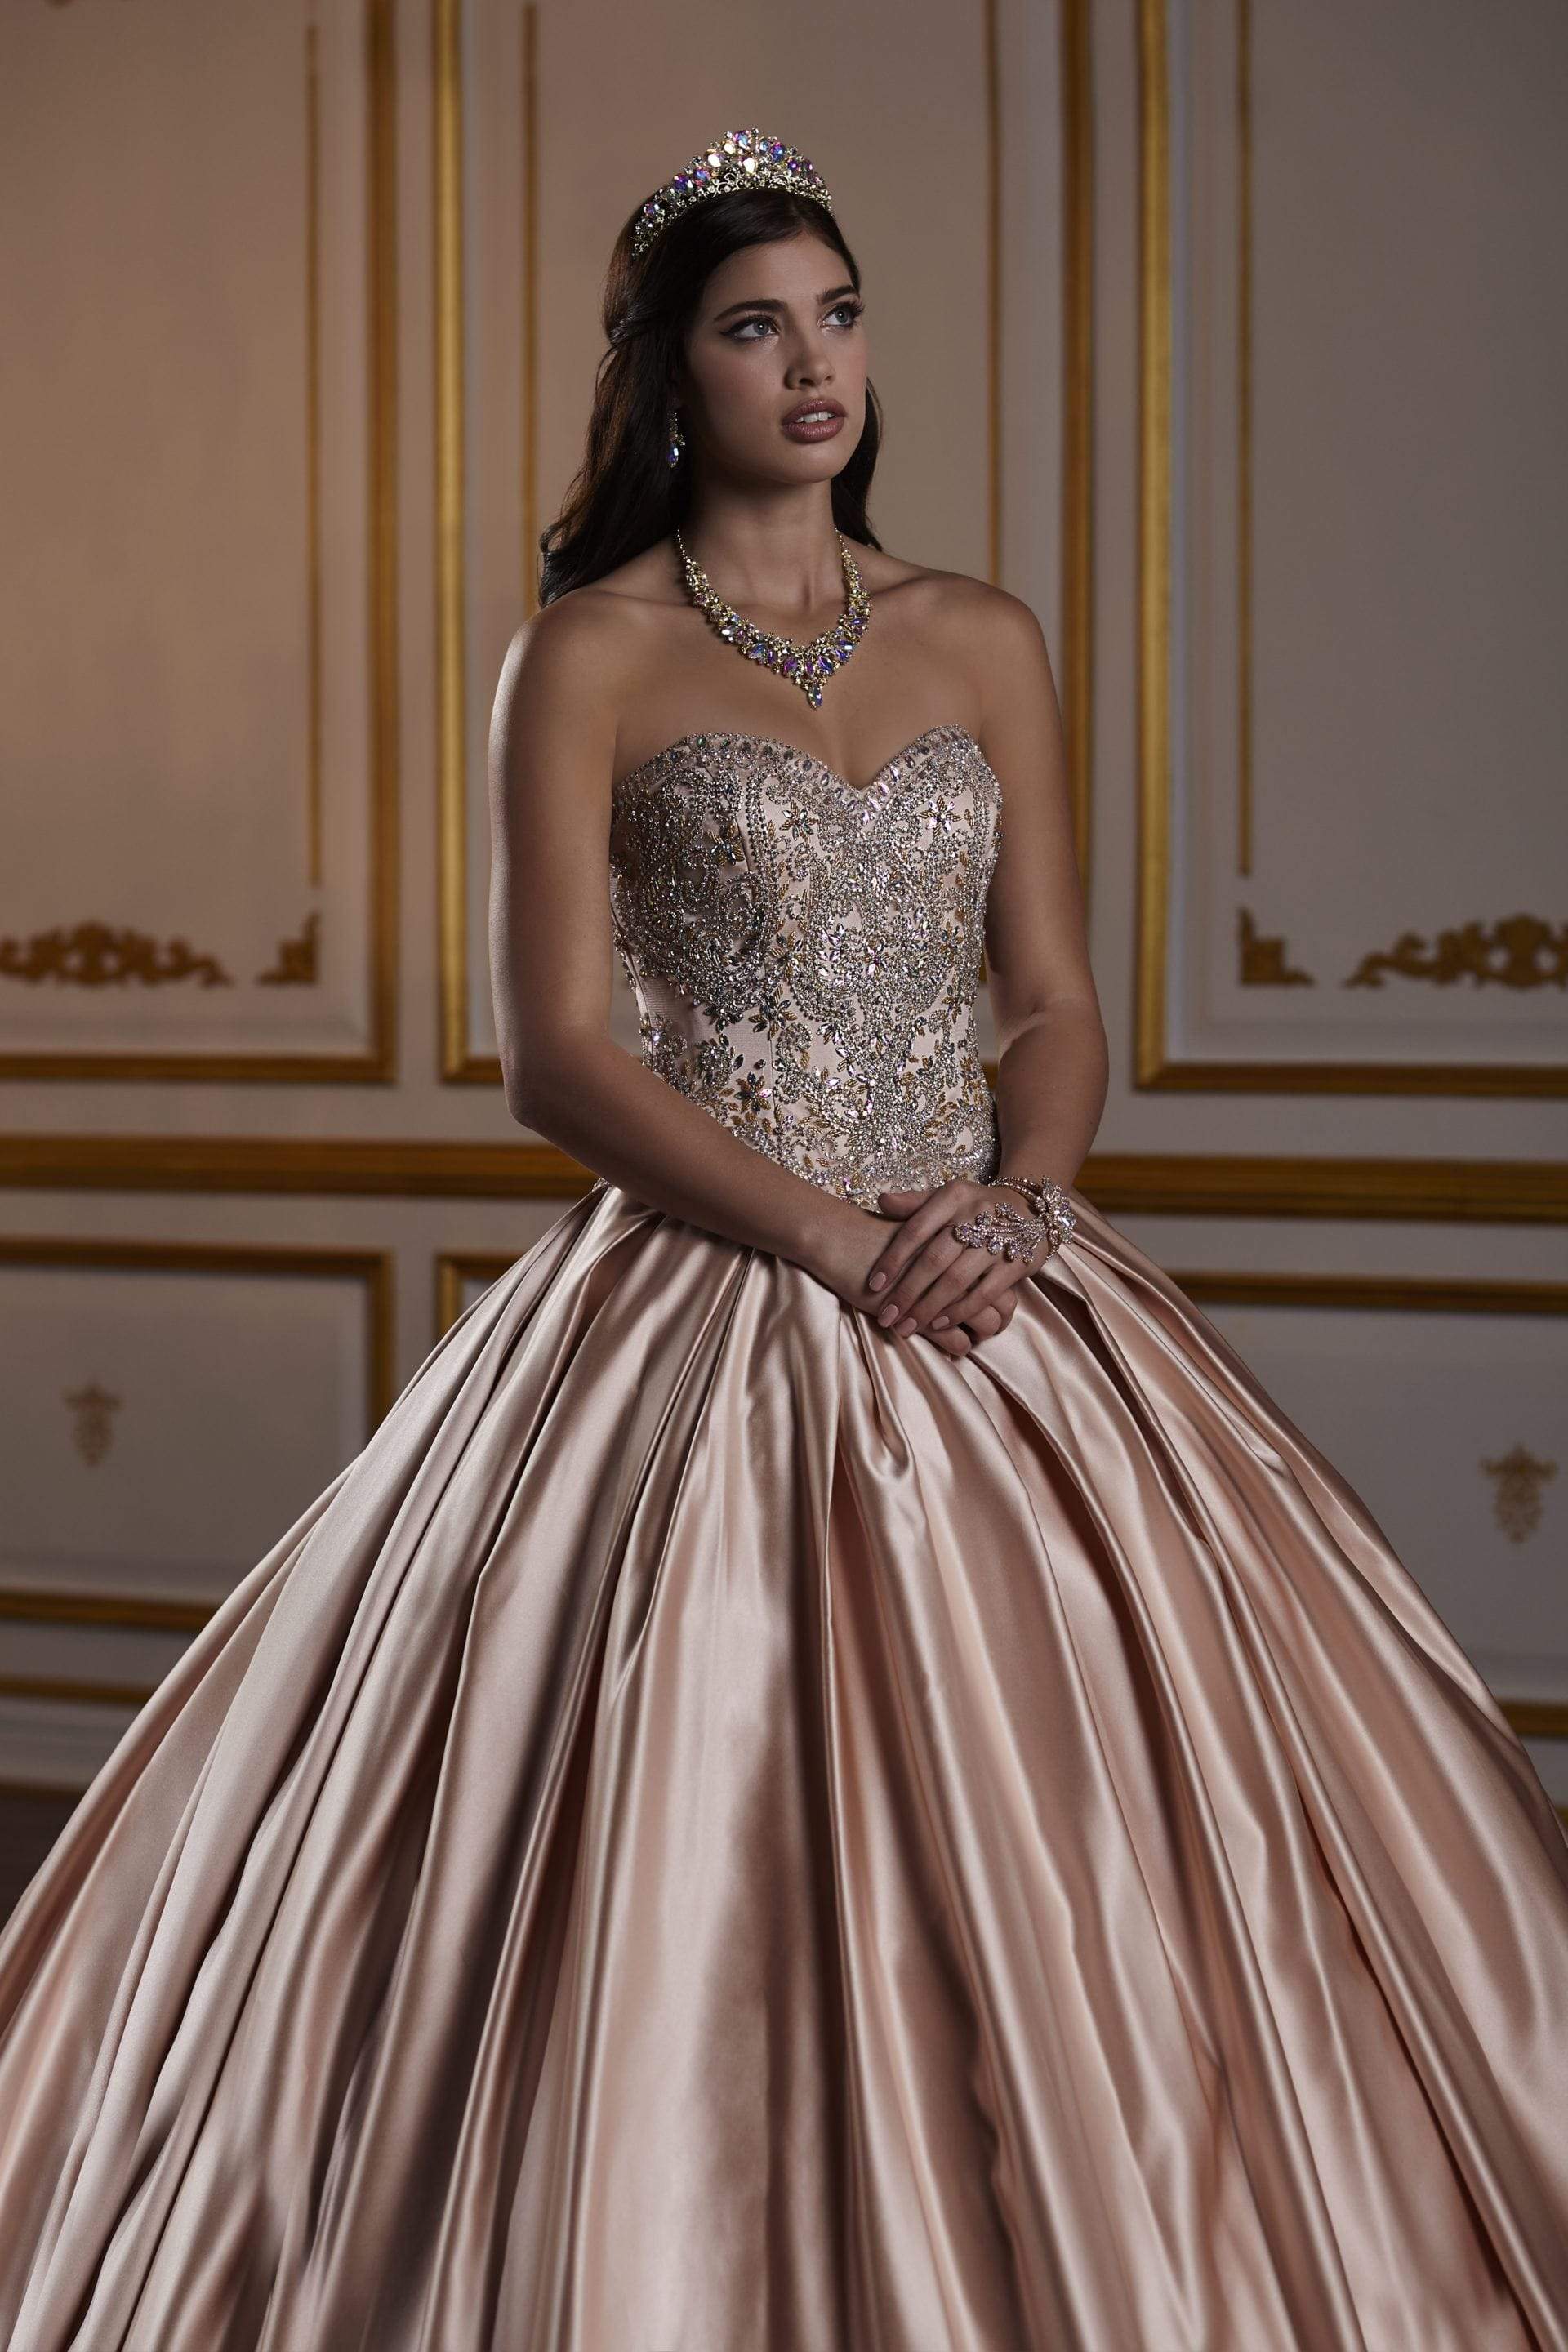 Halter neck ball gown with beaded straps and sweetheart bodice.